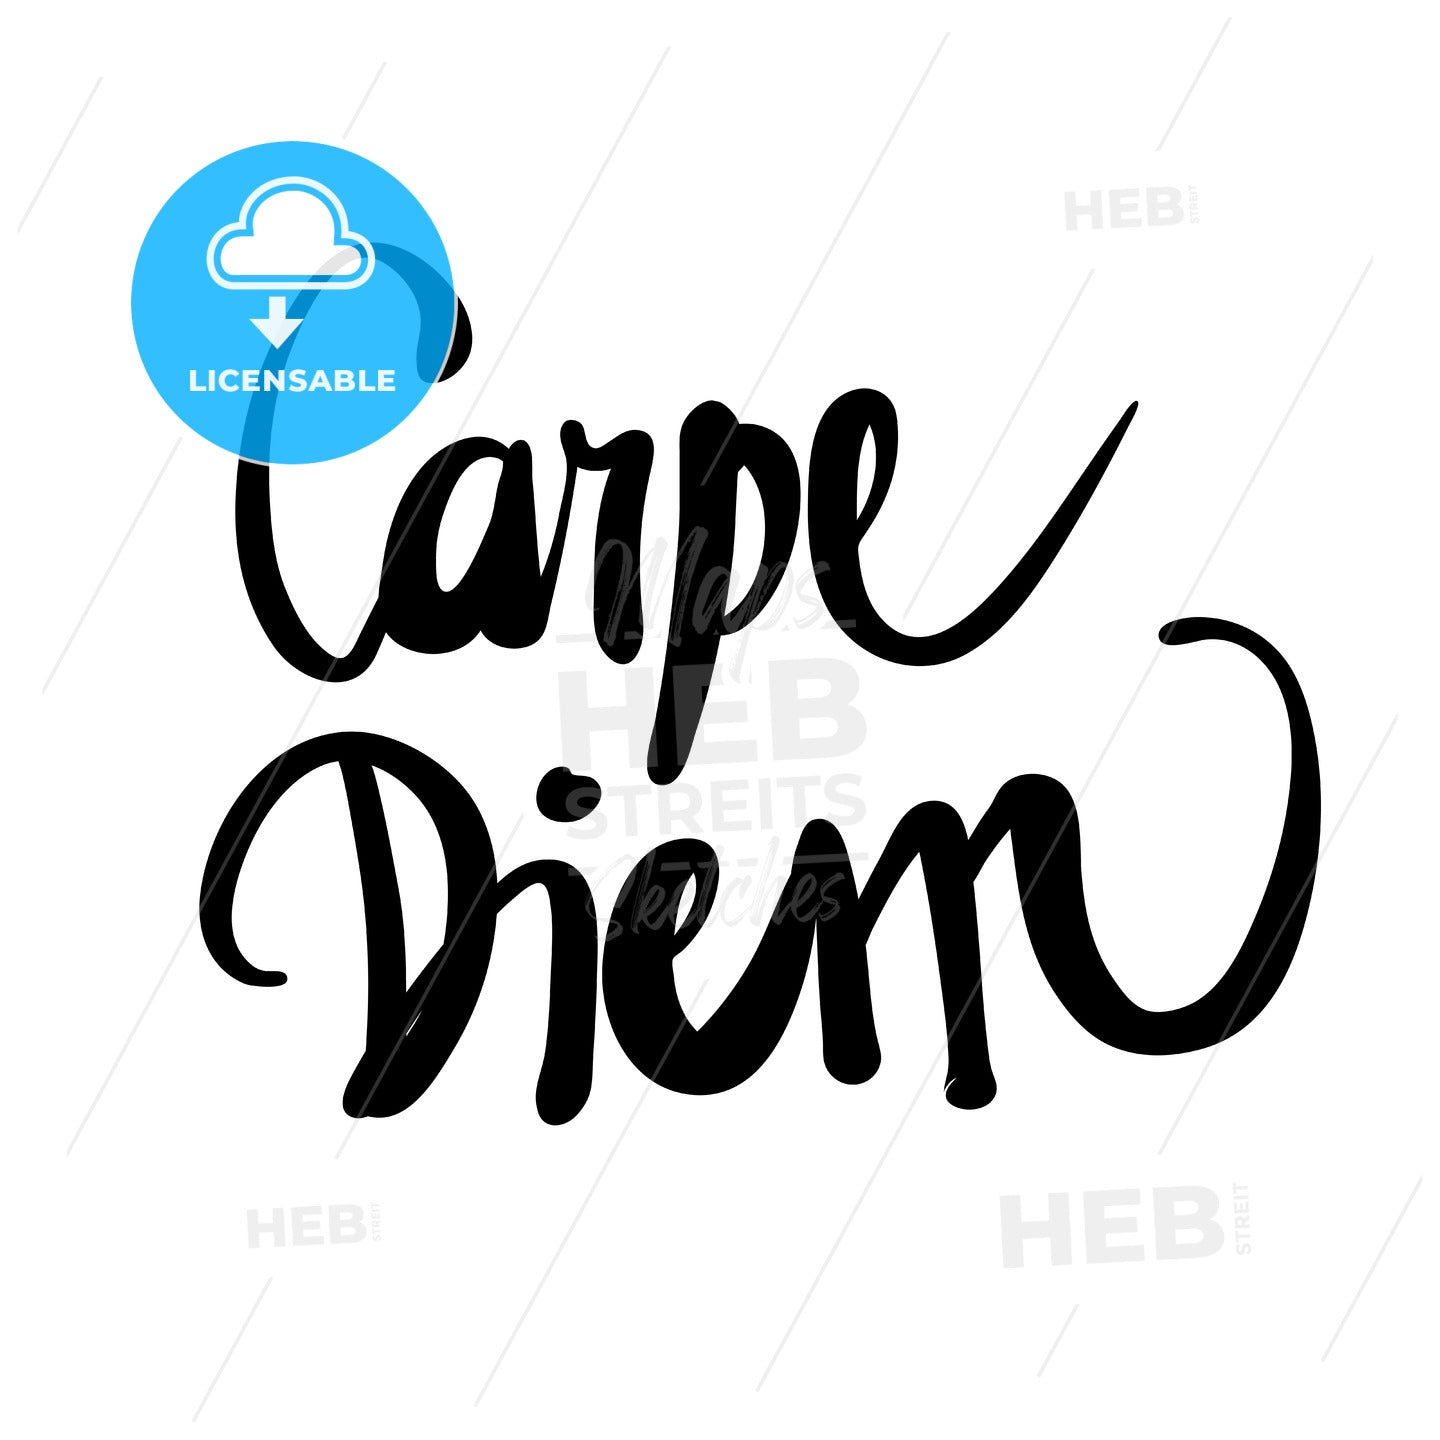 Carpe diem, Use the day – instant download